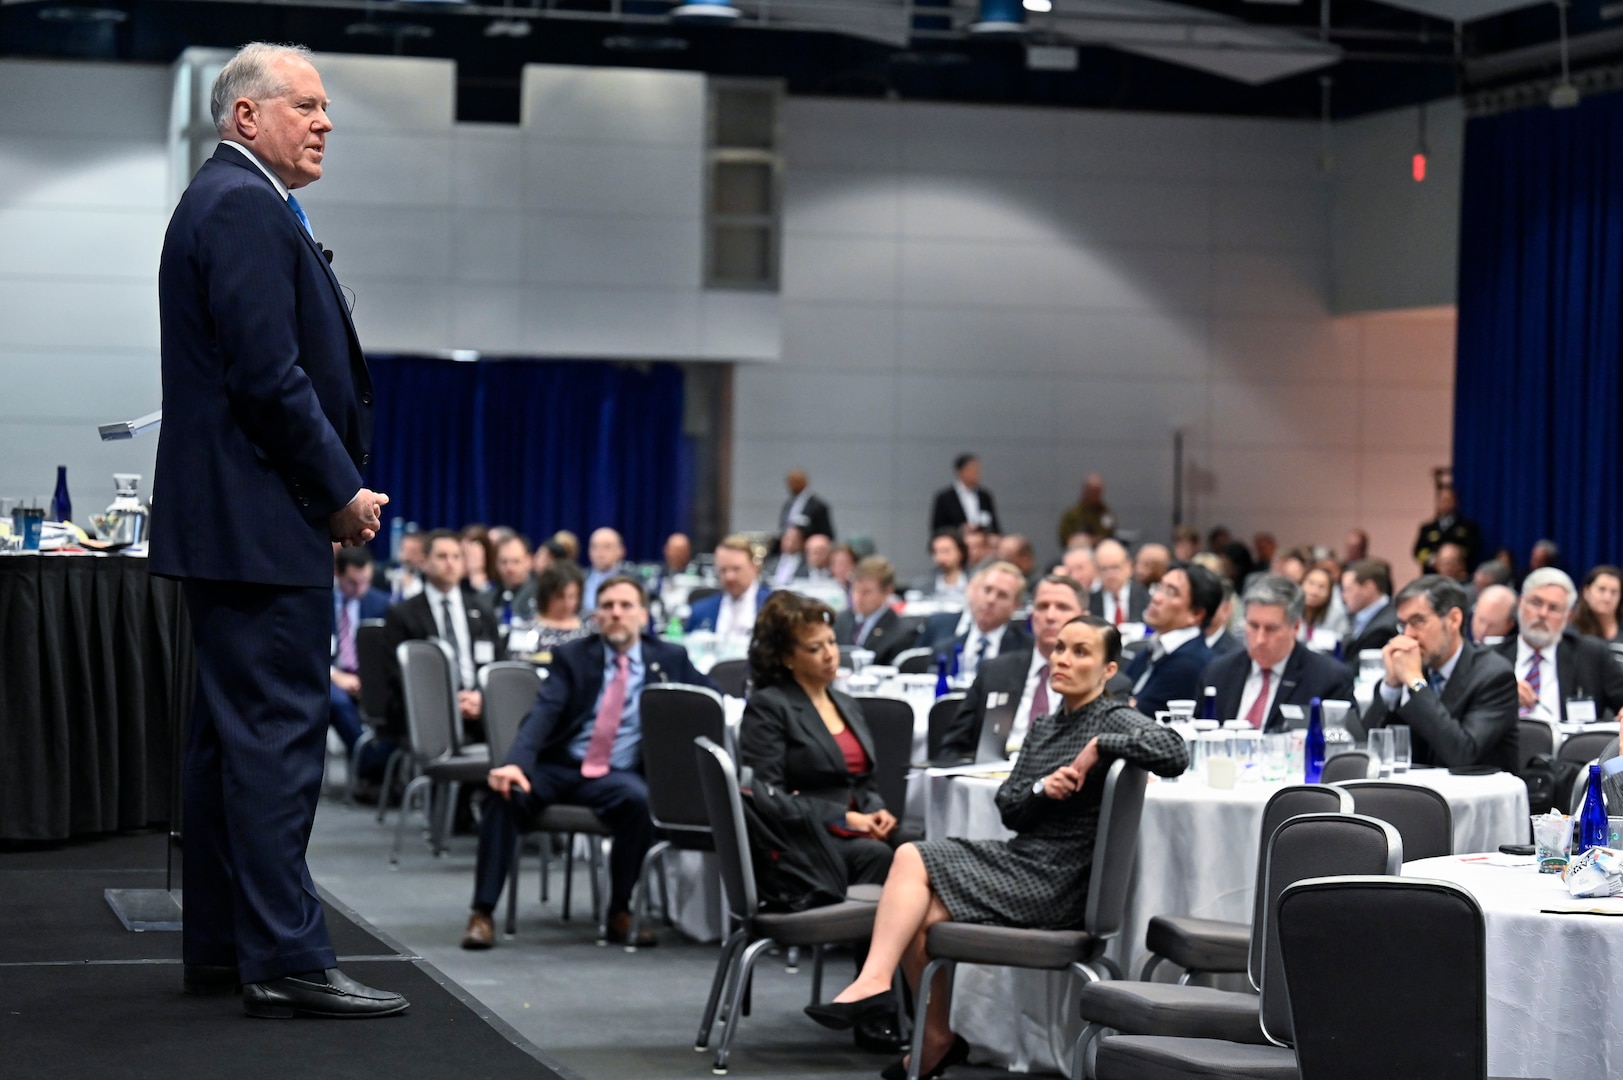 Secretary of the Air Force Frank Kendall speaks during the McAleese FY2023 Defense Program Conference in Washington, D.C., March 9, 2022.